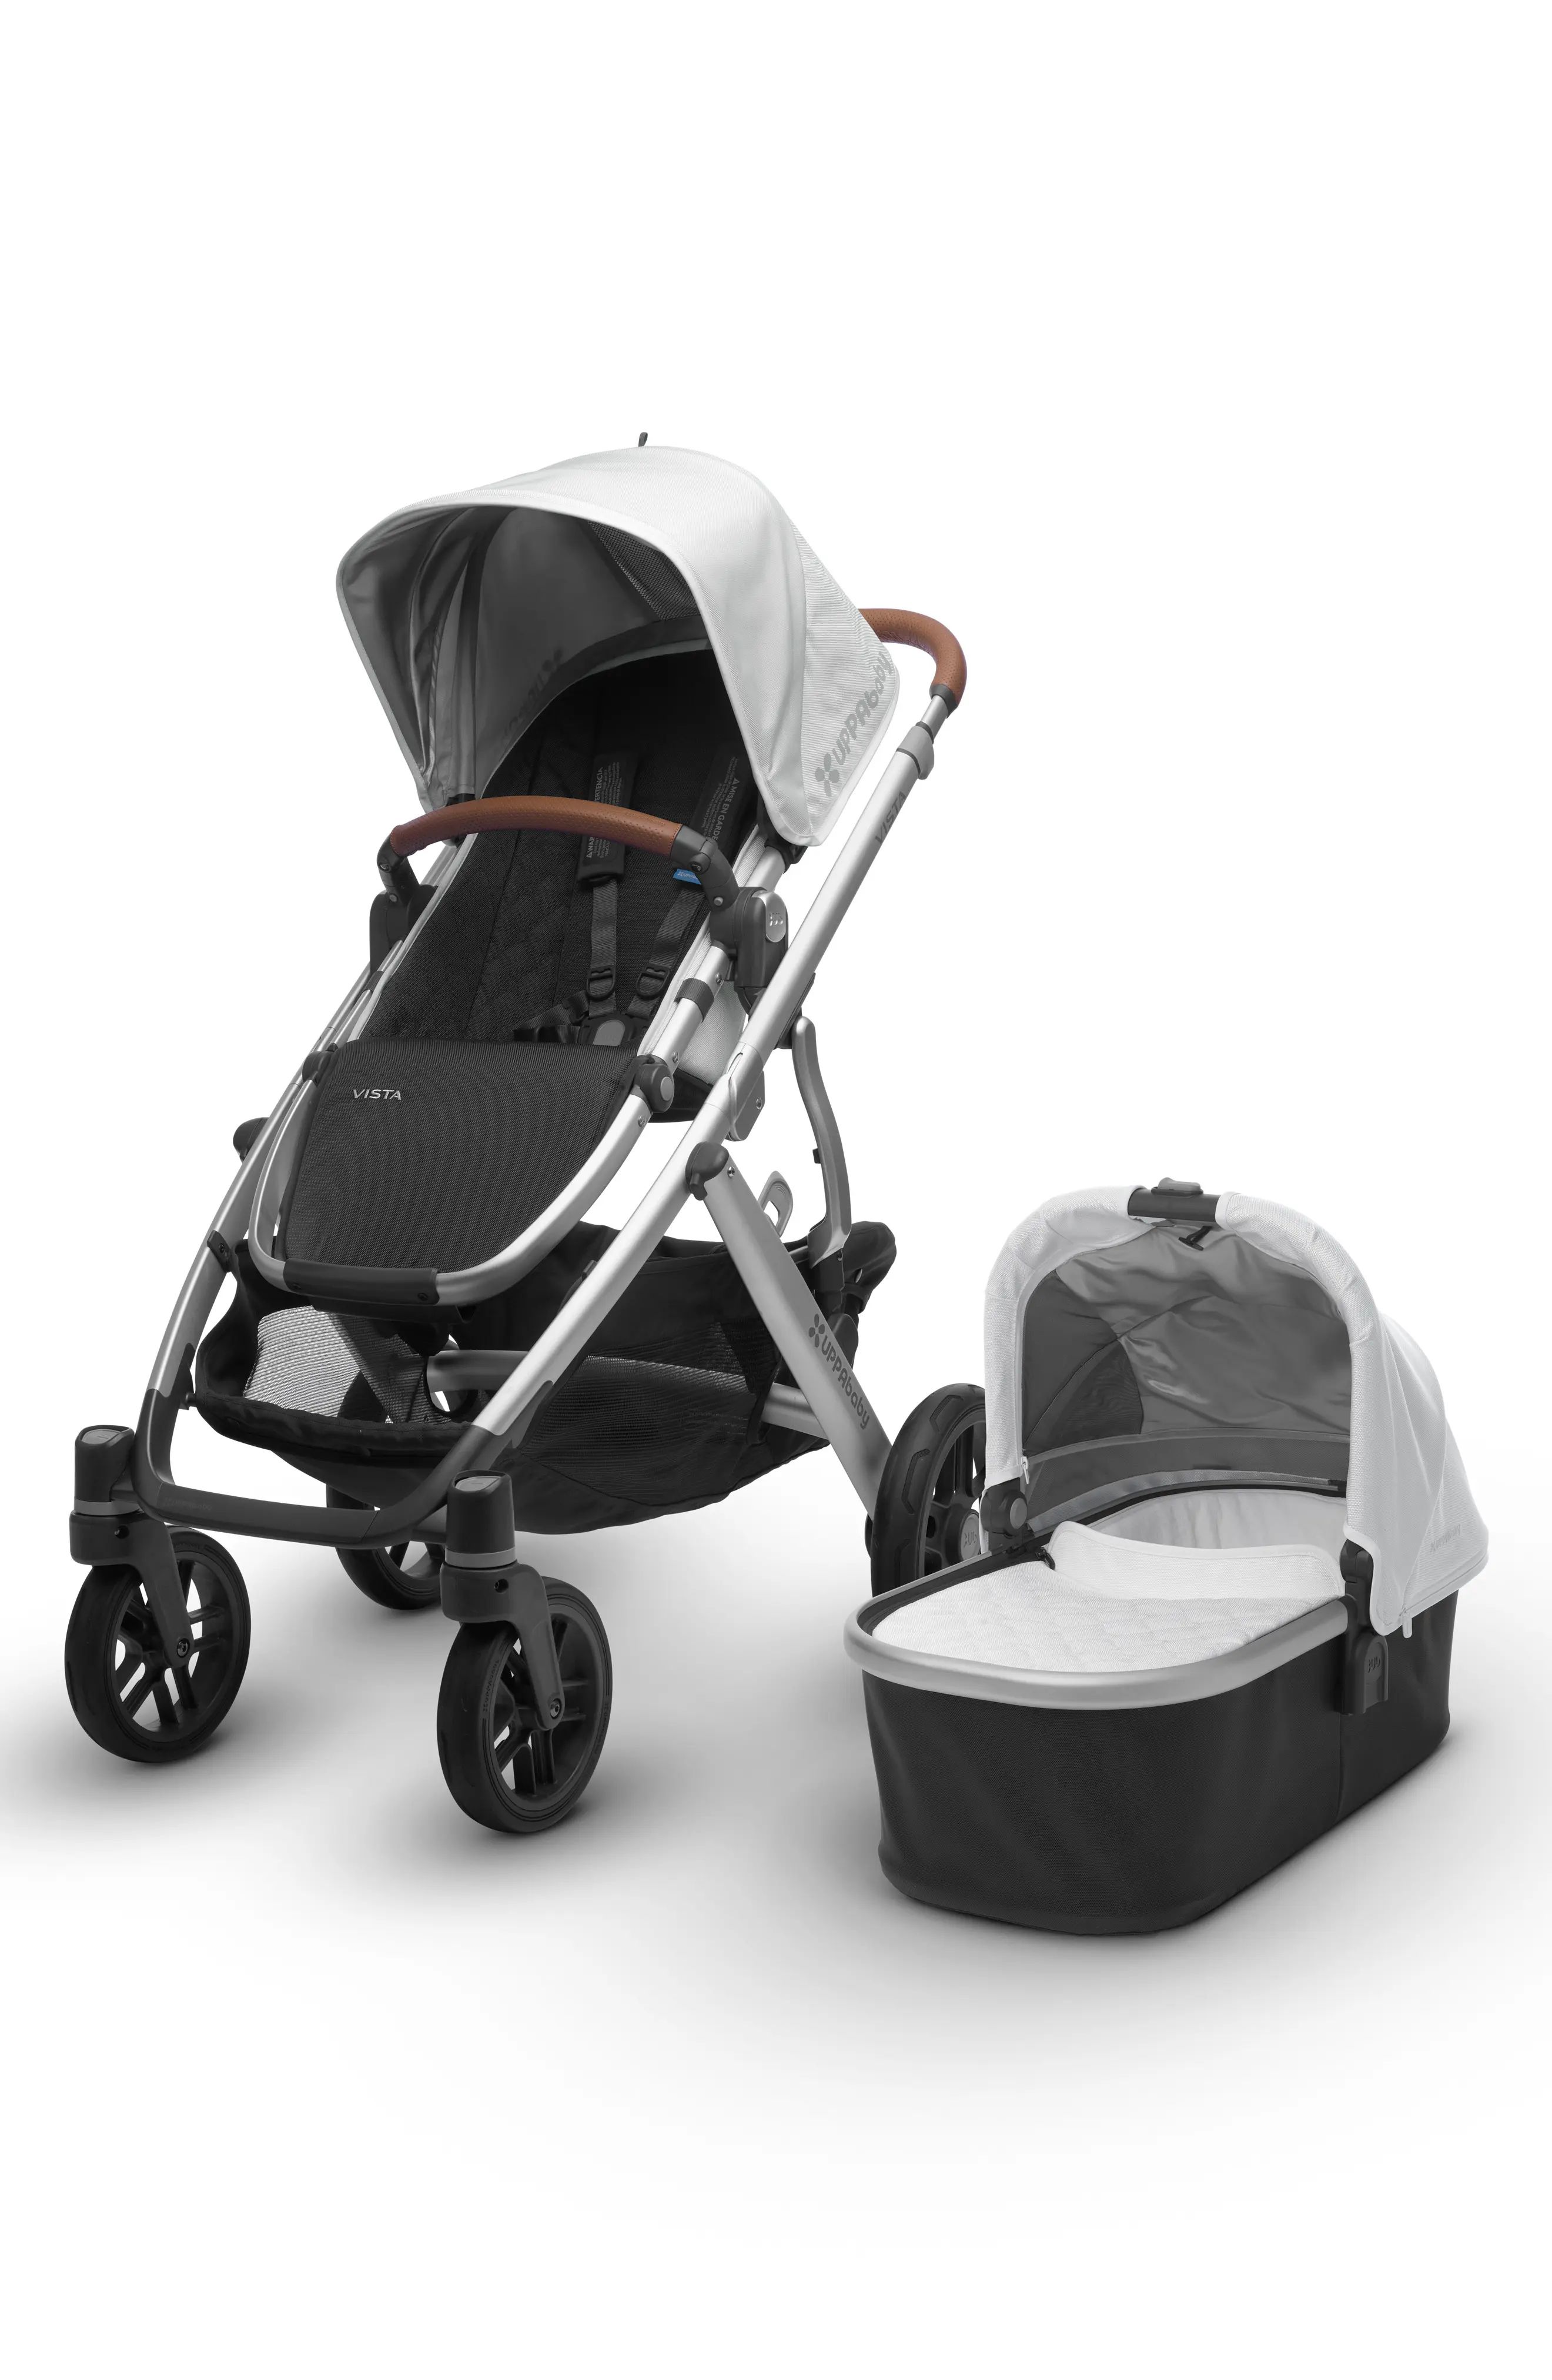 UPPAbaby 2018 VISTA Aluminum Frame Convertible Complete Stroller with Leather Trim | Nordstrom